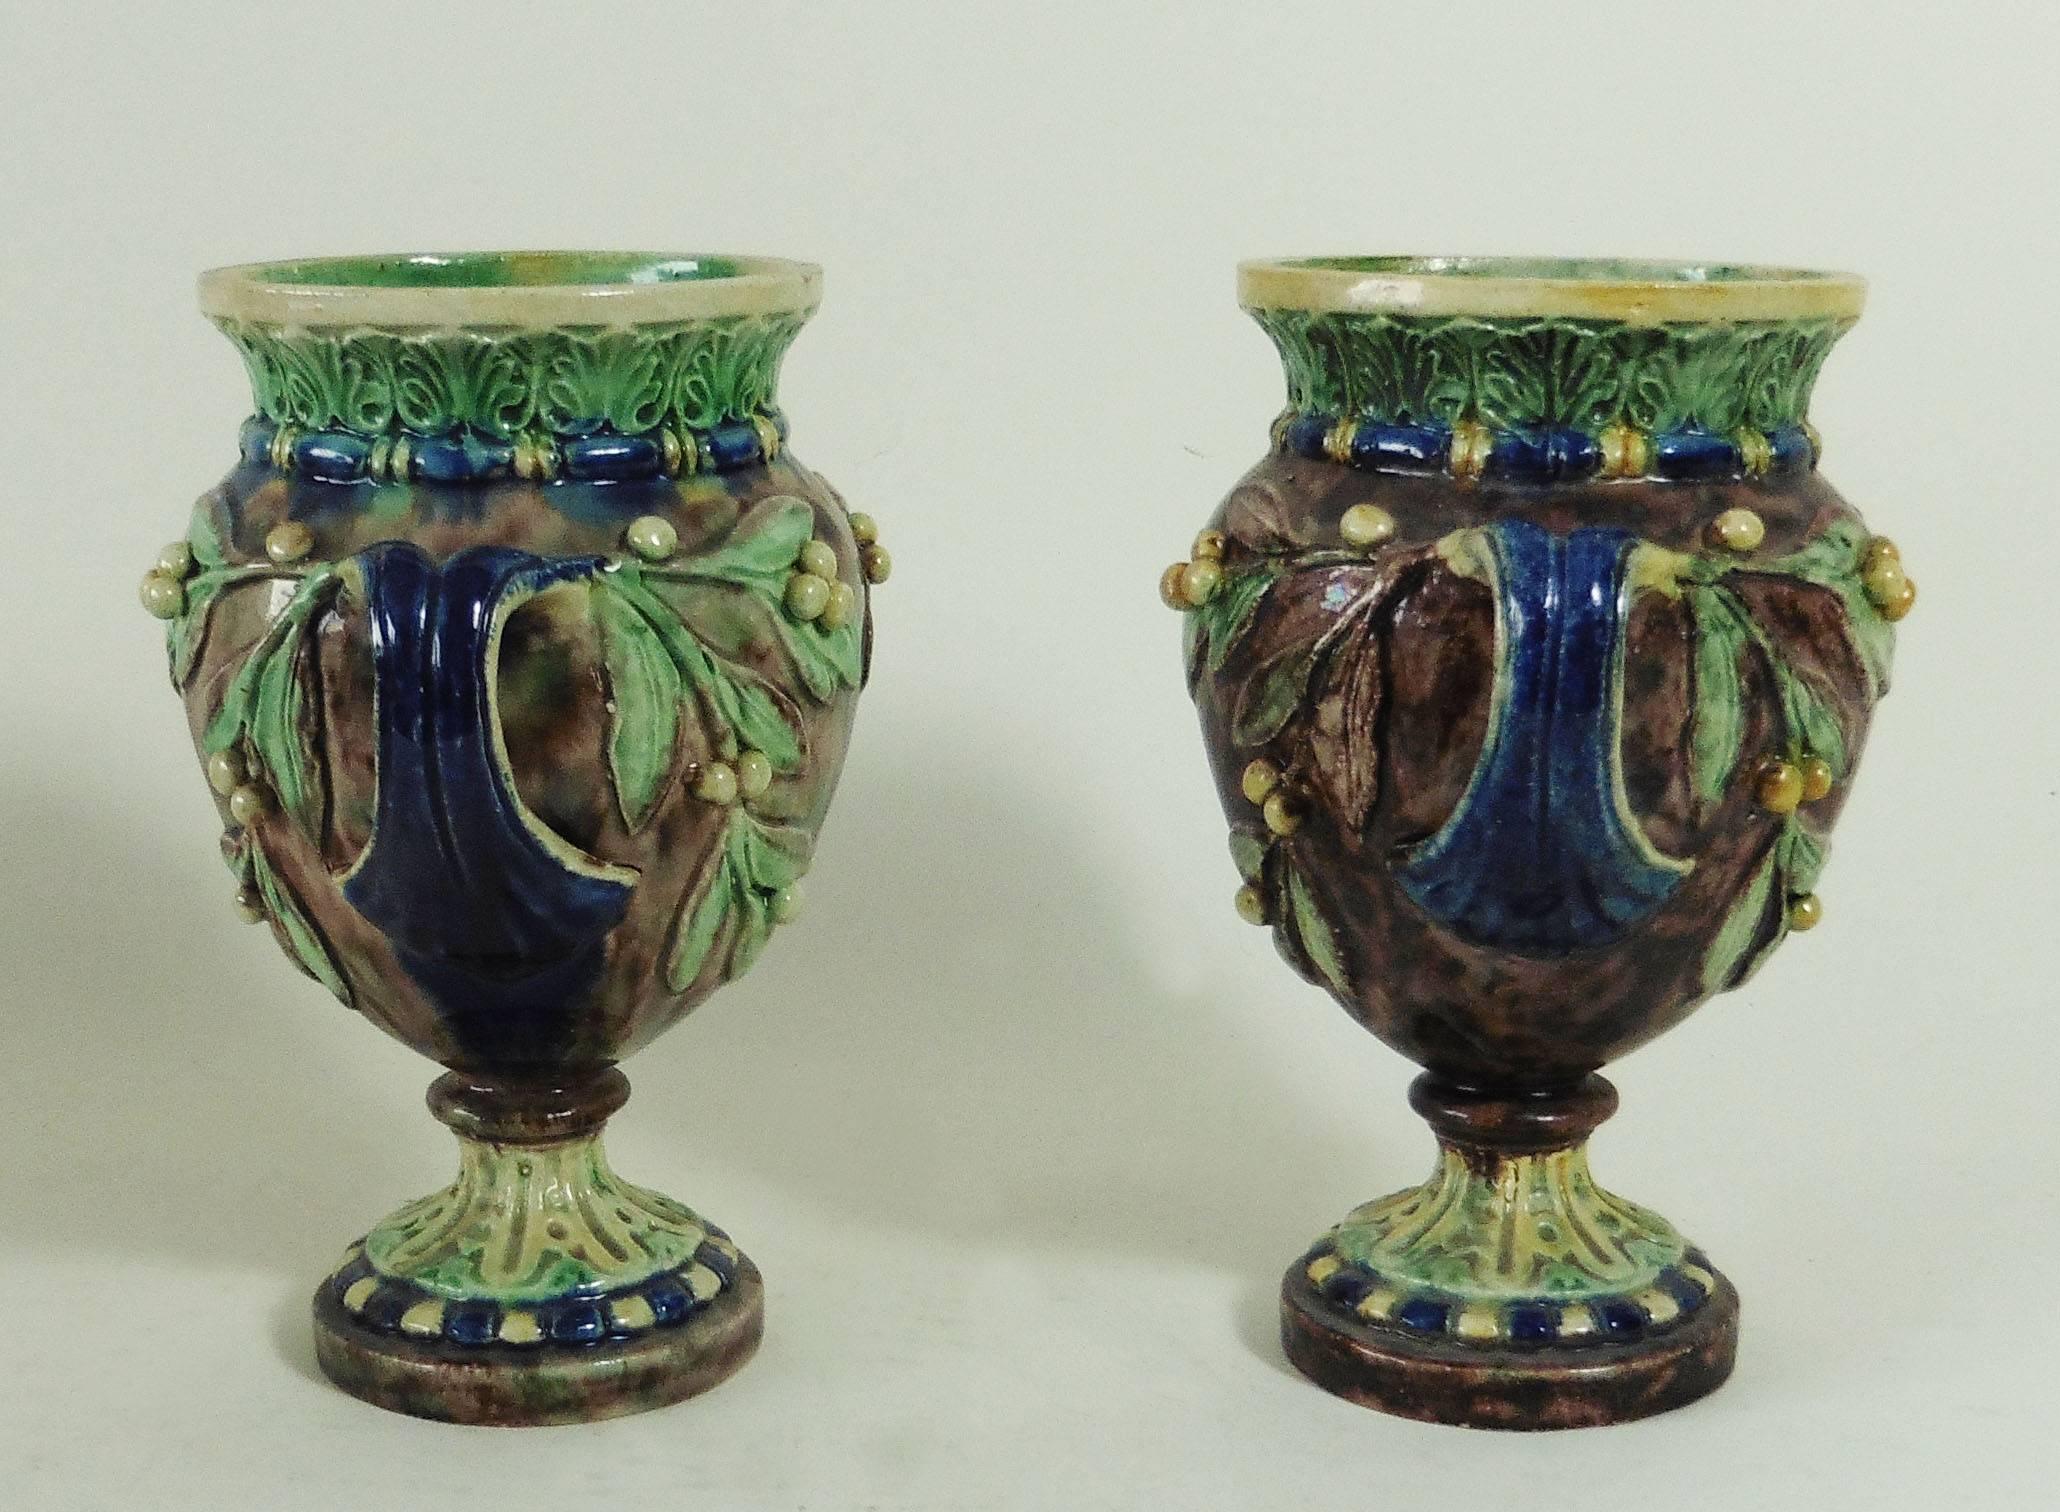 Palissy pair of small handled vases decorated with mistletoe, circa 1880.
The School of Paris was composed by makers as Victor Barbizet, Francois Maurice, Thomas Sergent, Georges pull, it's a group of ceramists who produced Palissy pieces at the